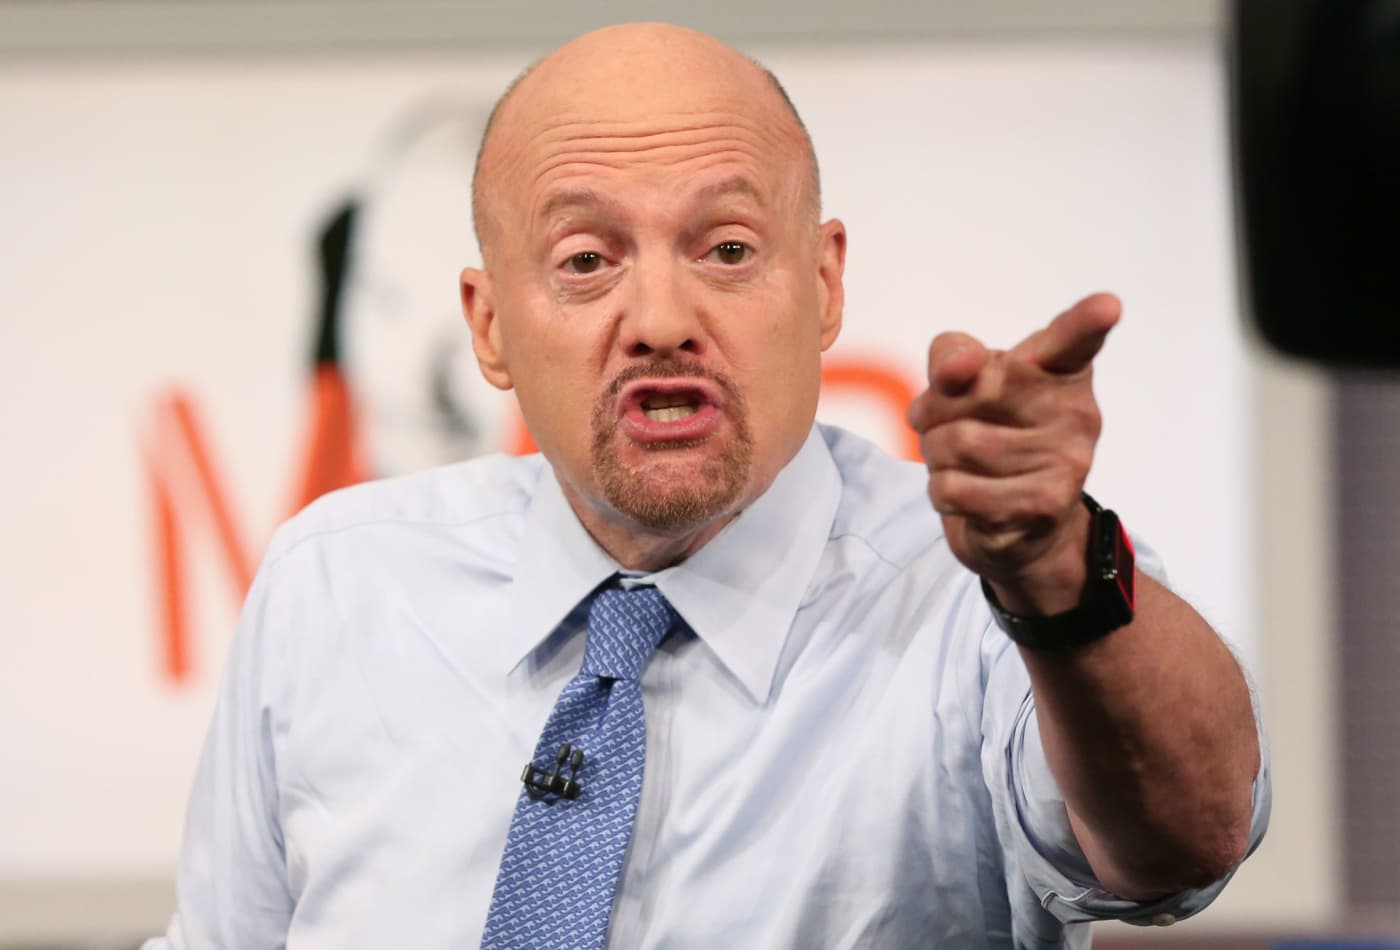 Jim Cramer says these hard-hit stocks are profitable and now look cheap enough to buy